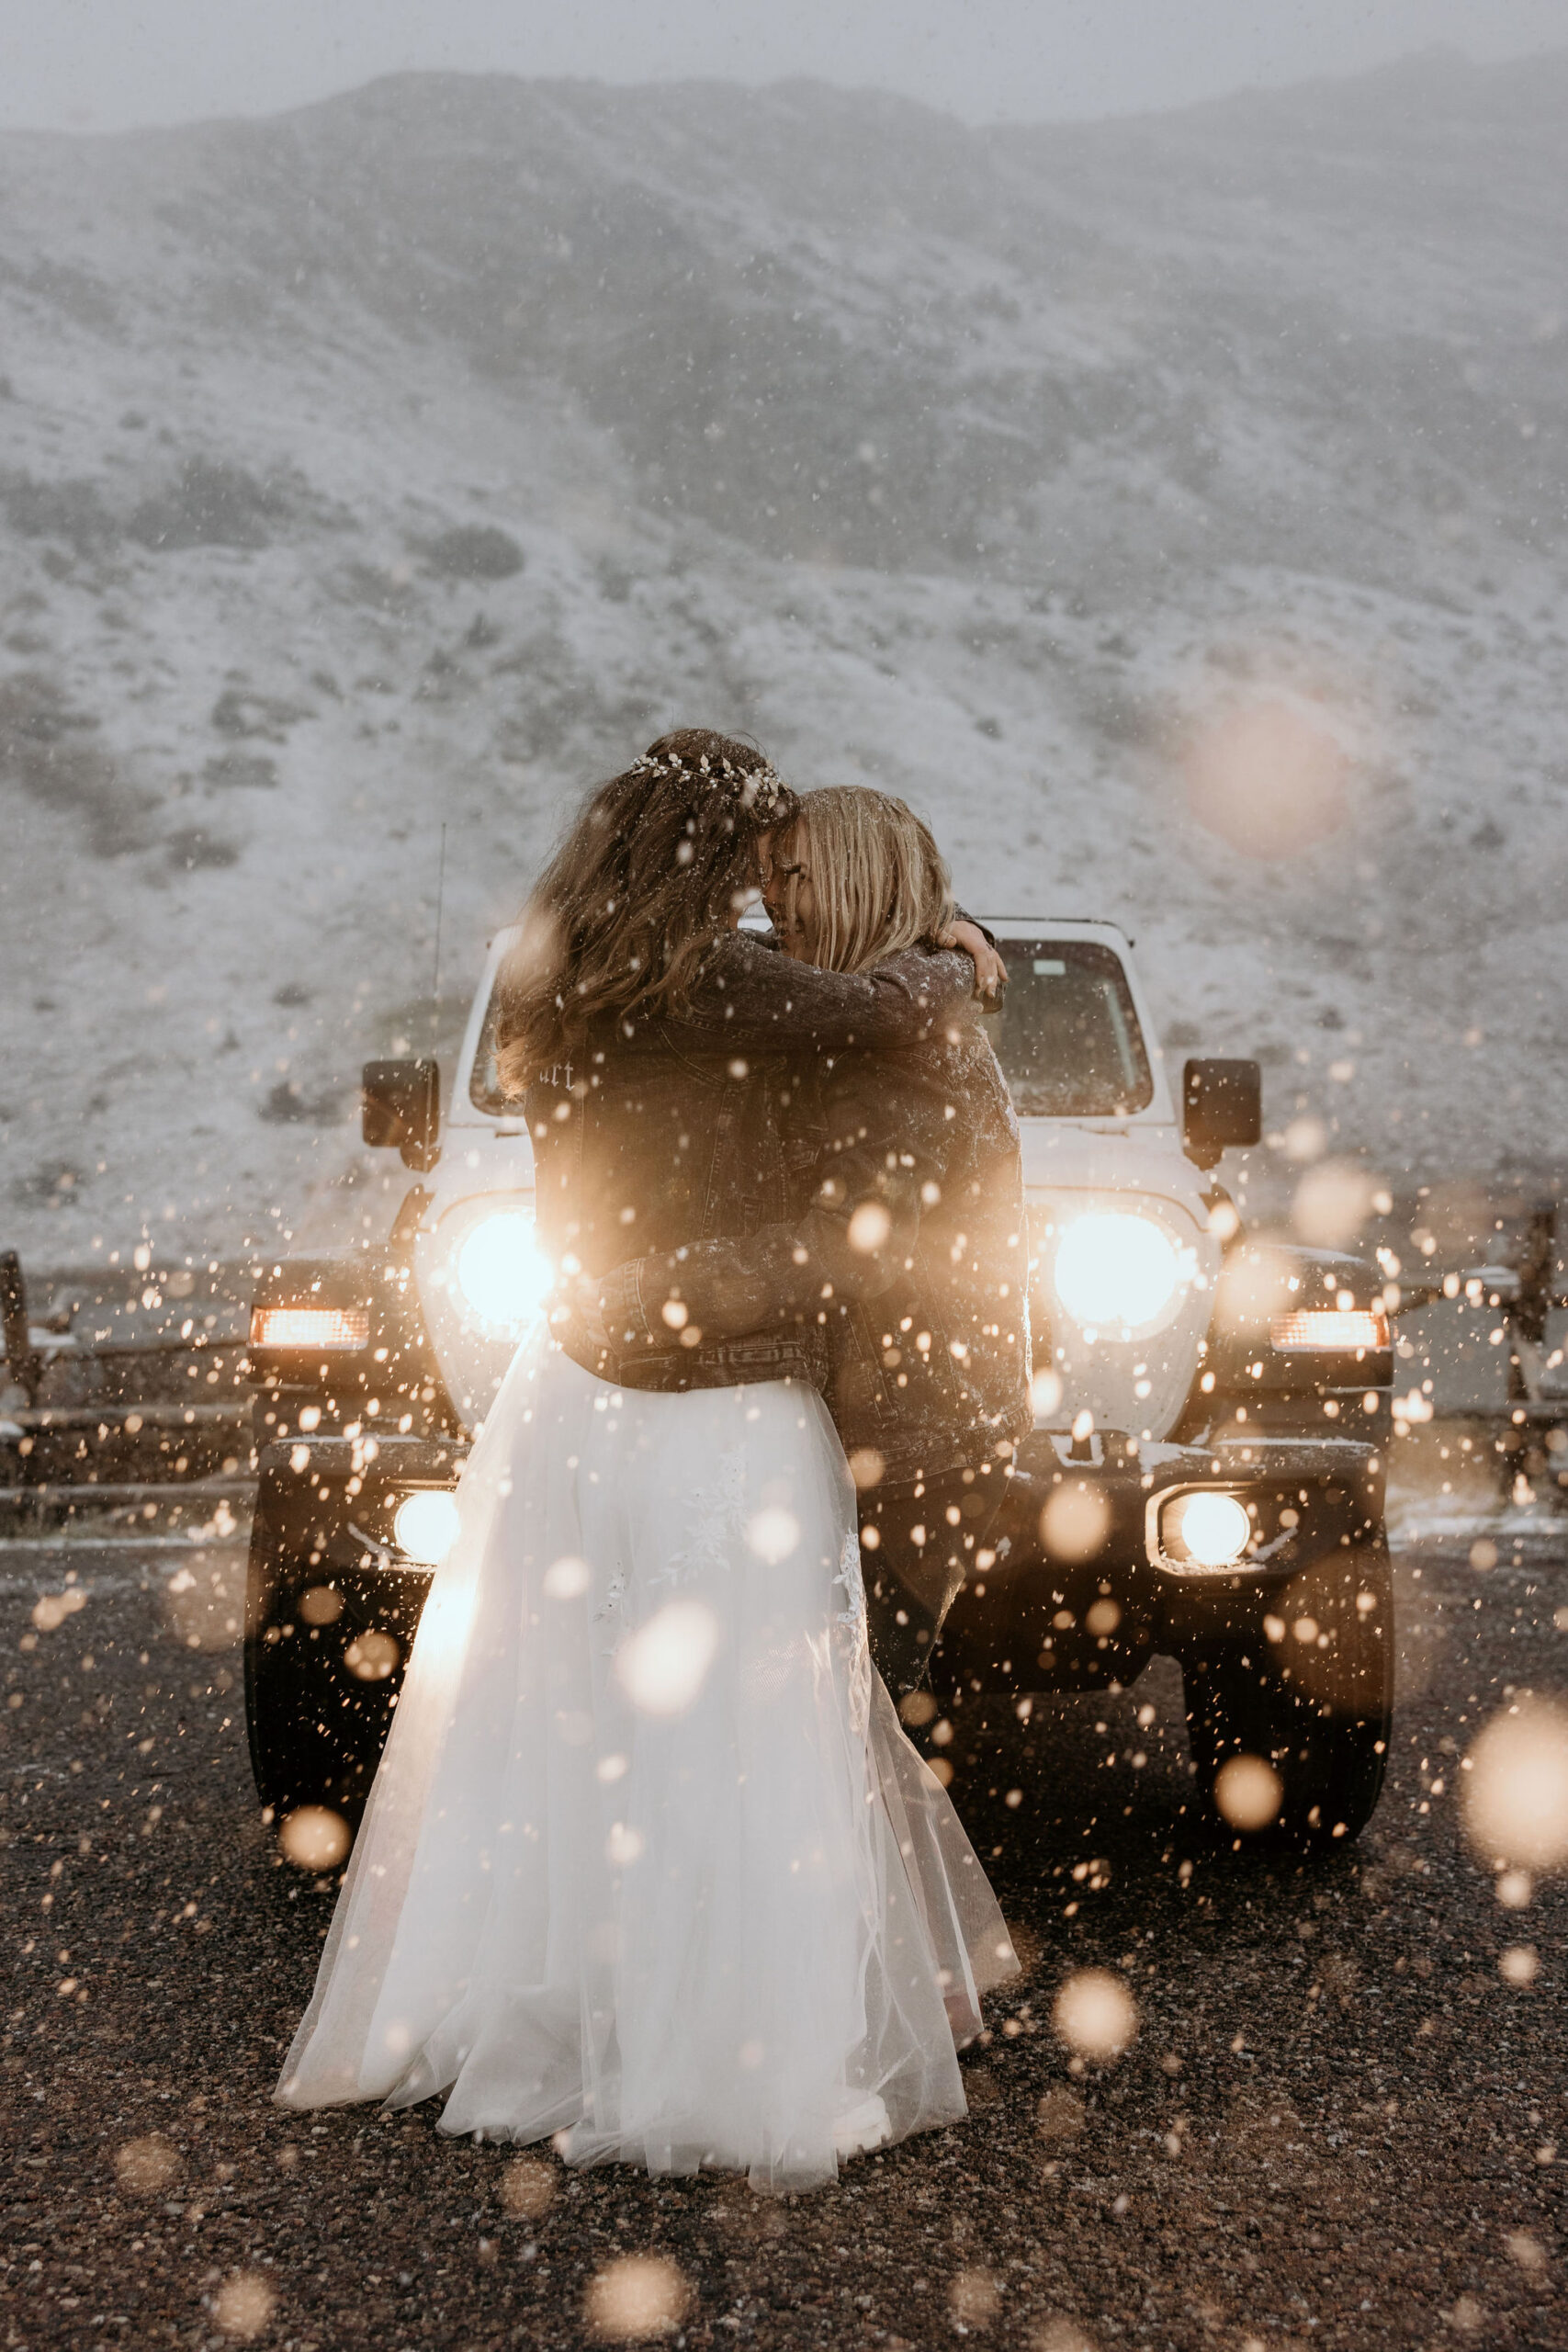 LGBTQ+ couple hugs in front of jeep in the snow during elopement wedding day in colorado.